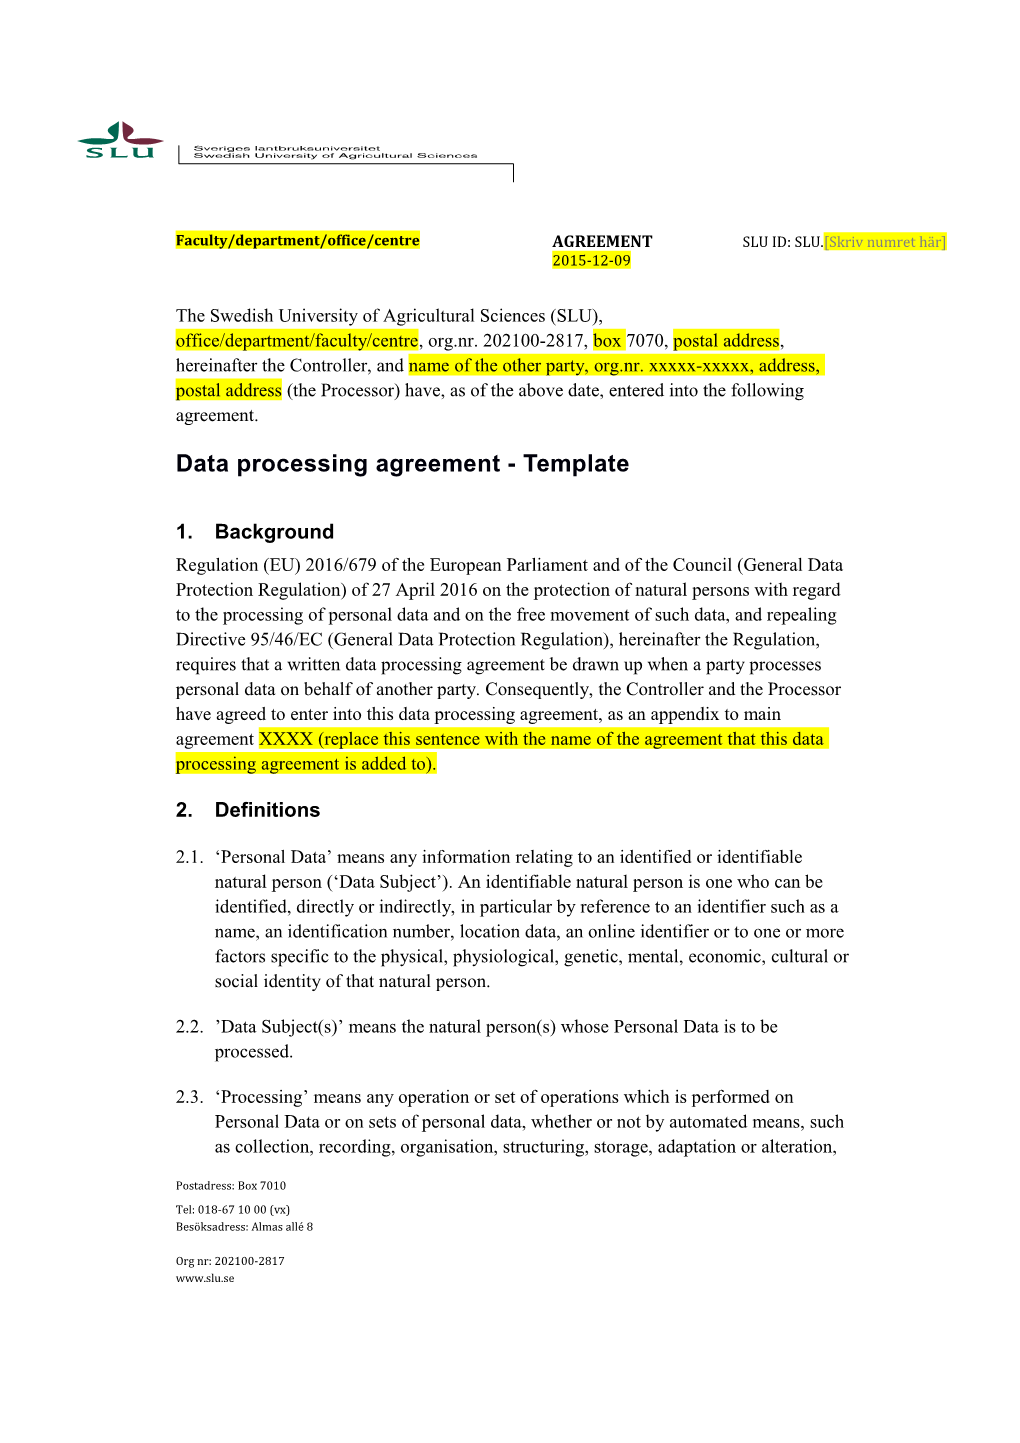 Data Processing Agreement - Template